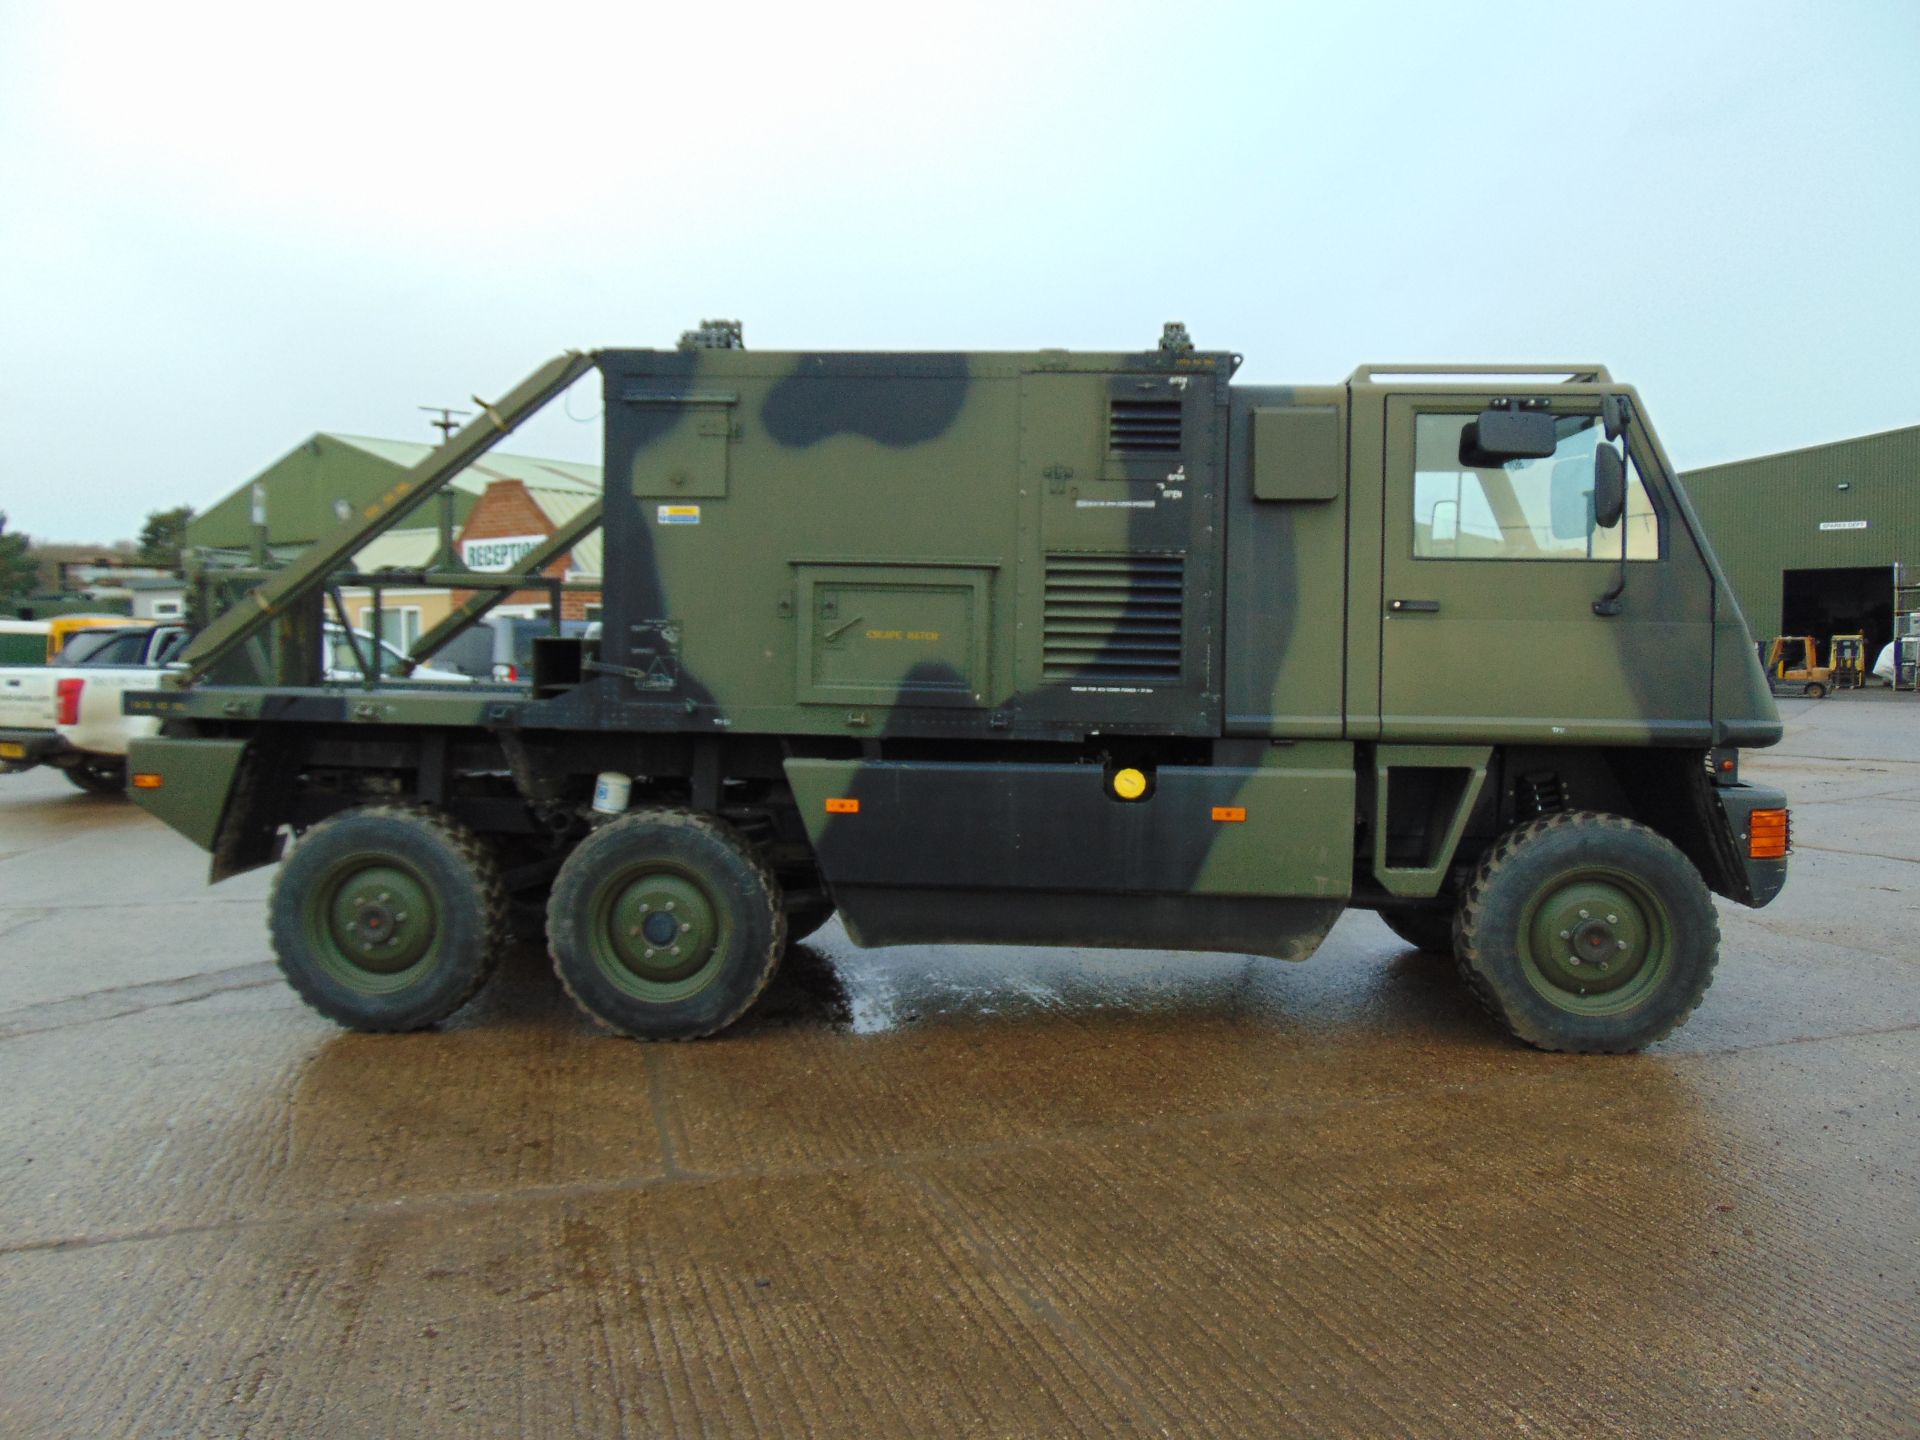 Ex Reserve Left Hand Drive Mowag Bucher Duro II 6x6 High-Mobility Tactical Vehicle - Image 5 of 16